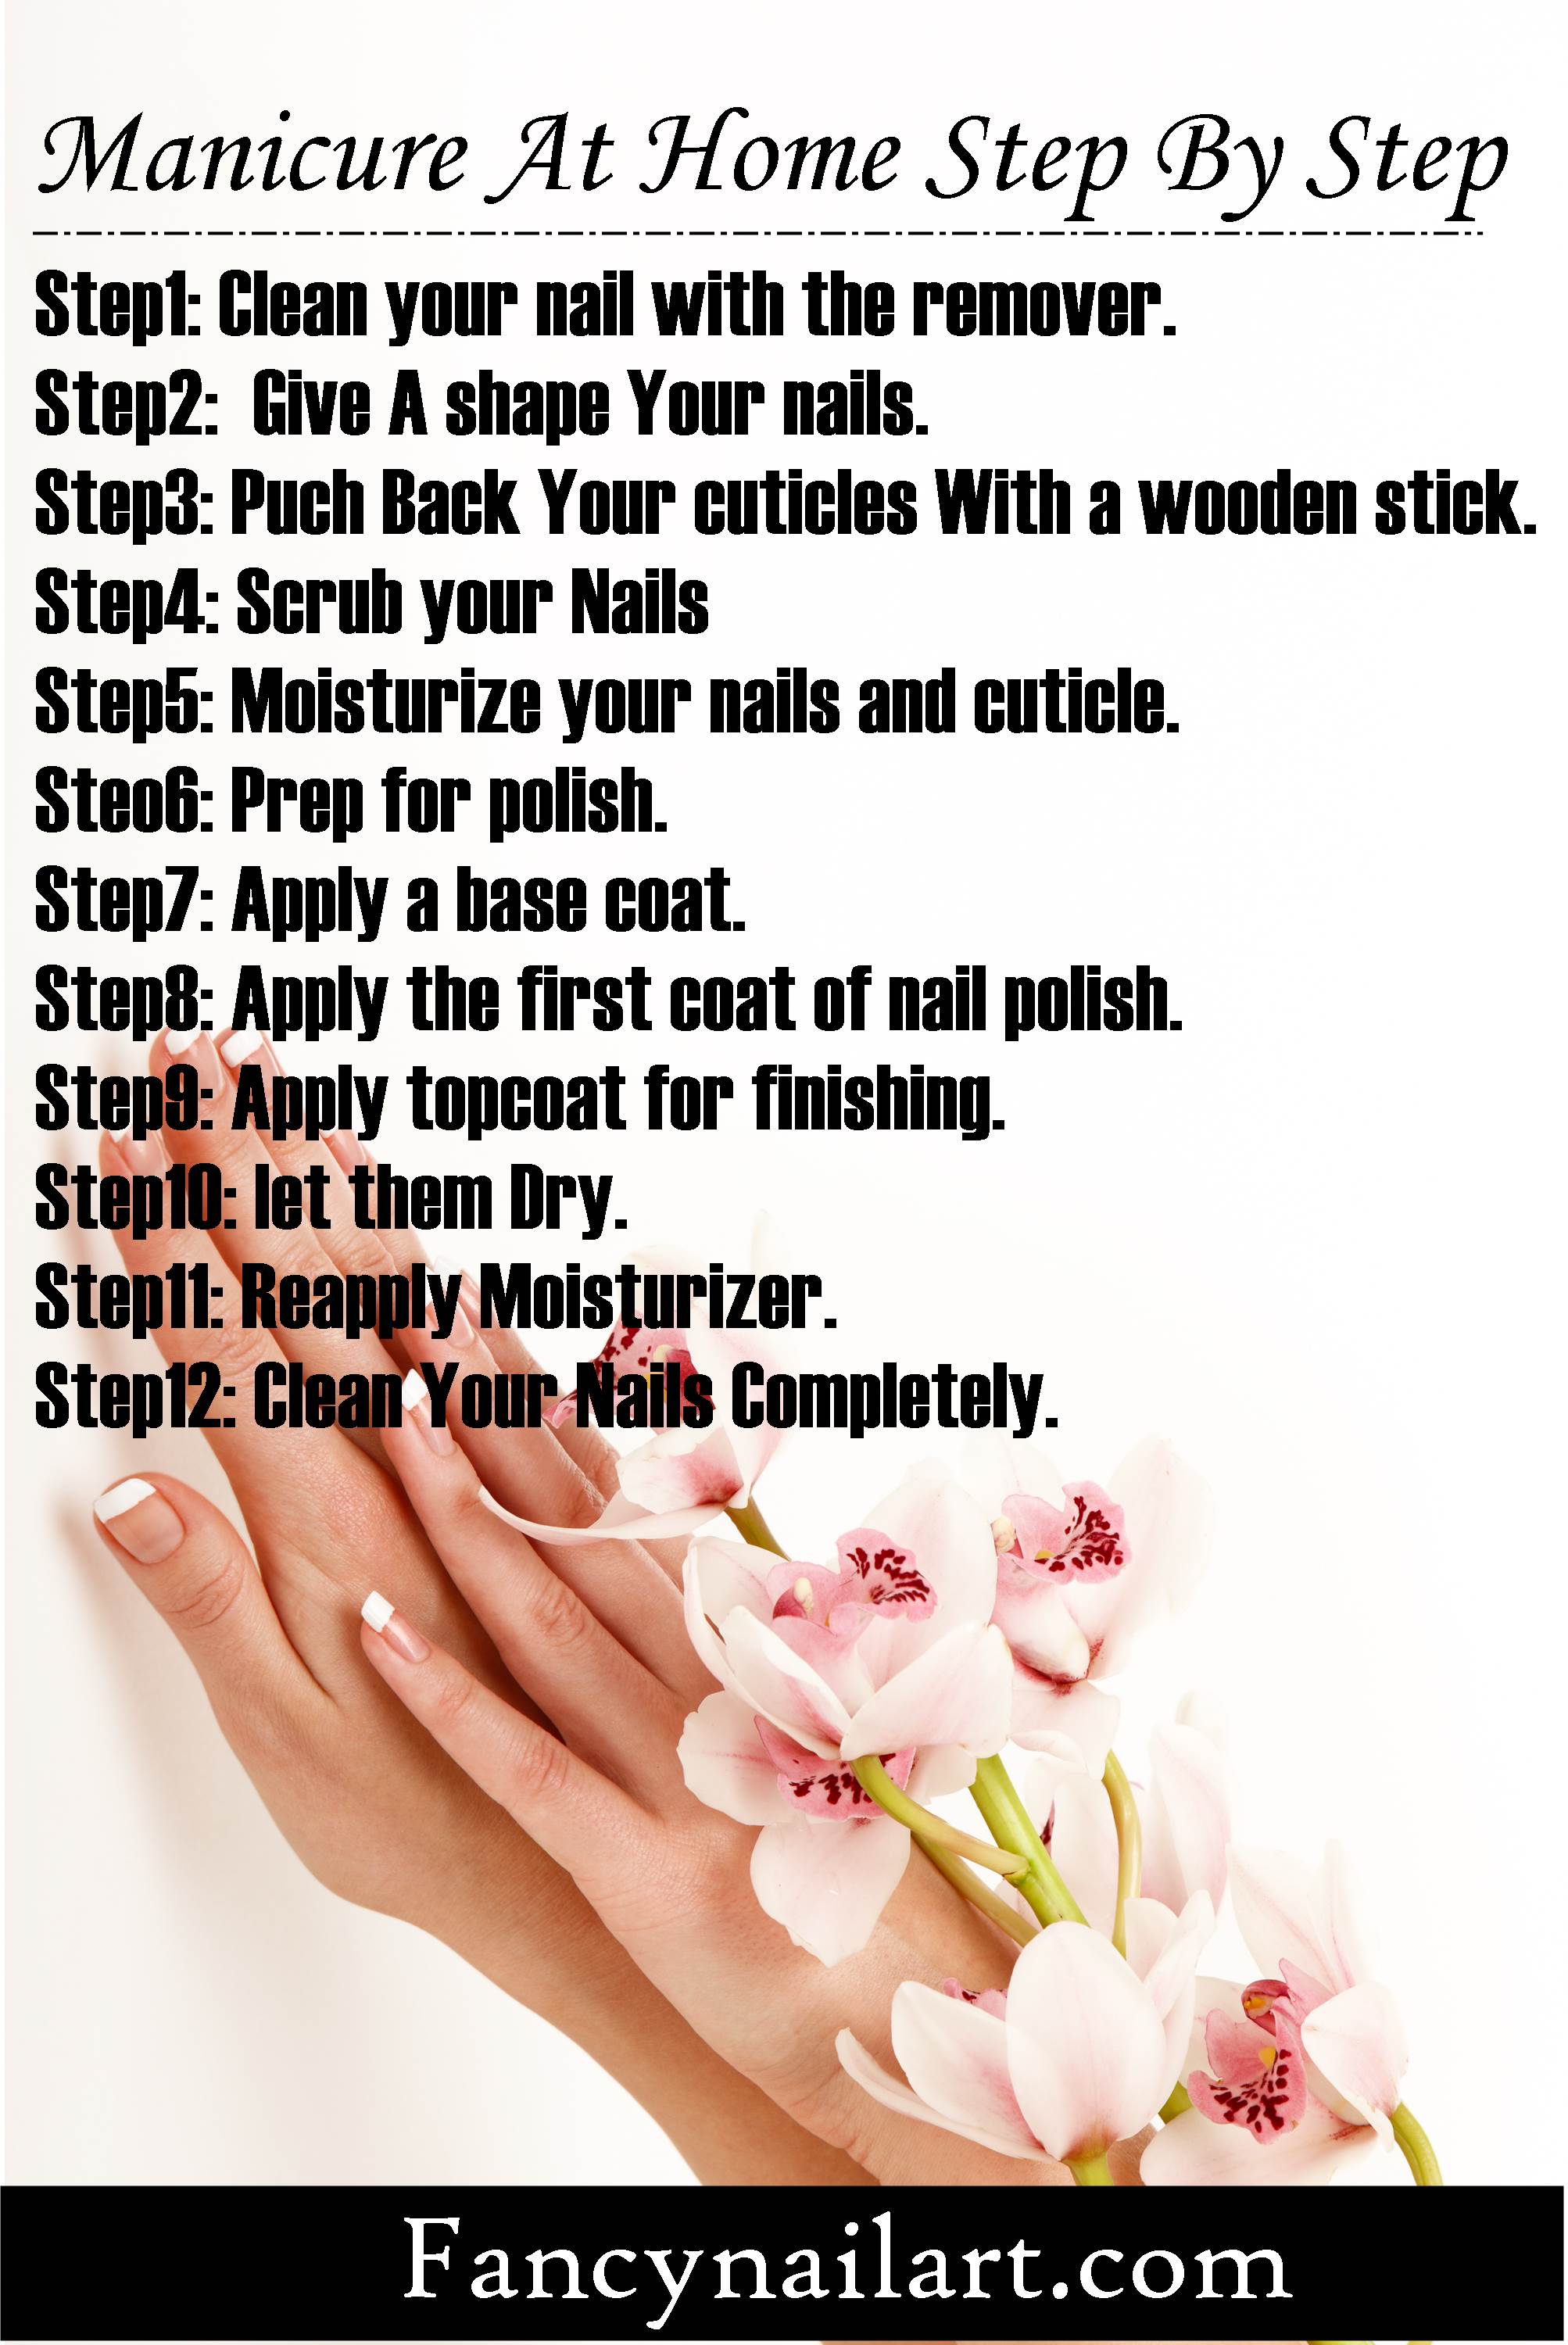 Steps Of Manicure At Home: